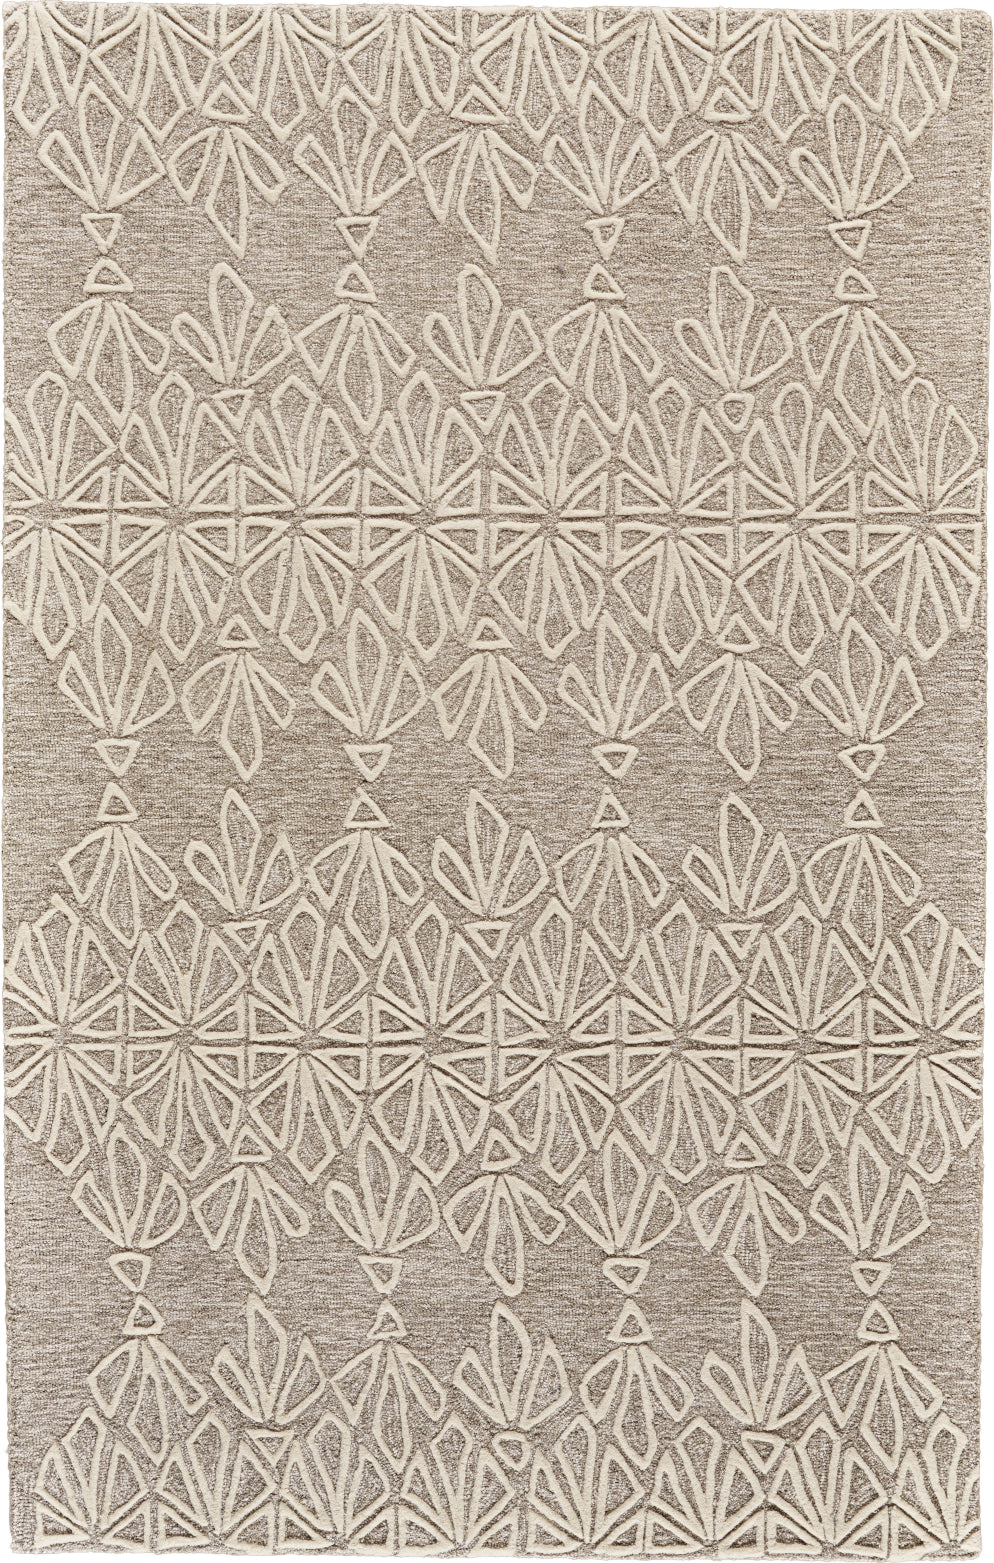 Feizy Enzo 8735F Taupe/Ivory Area Rug main image